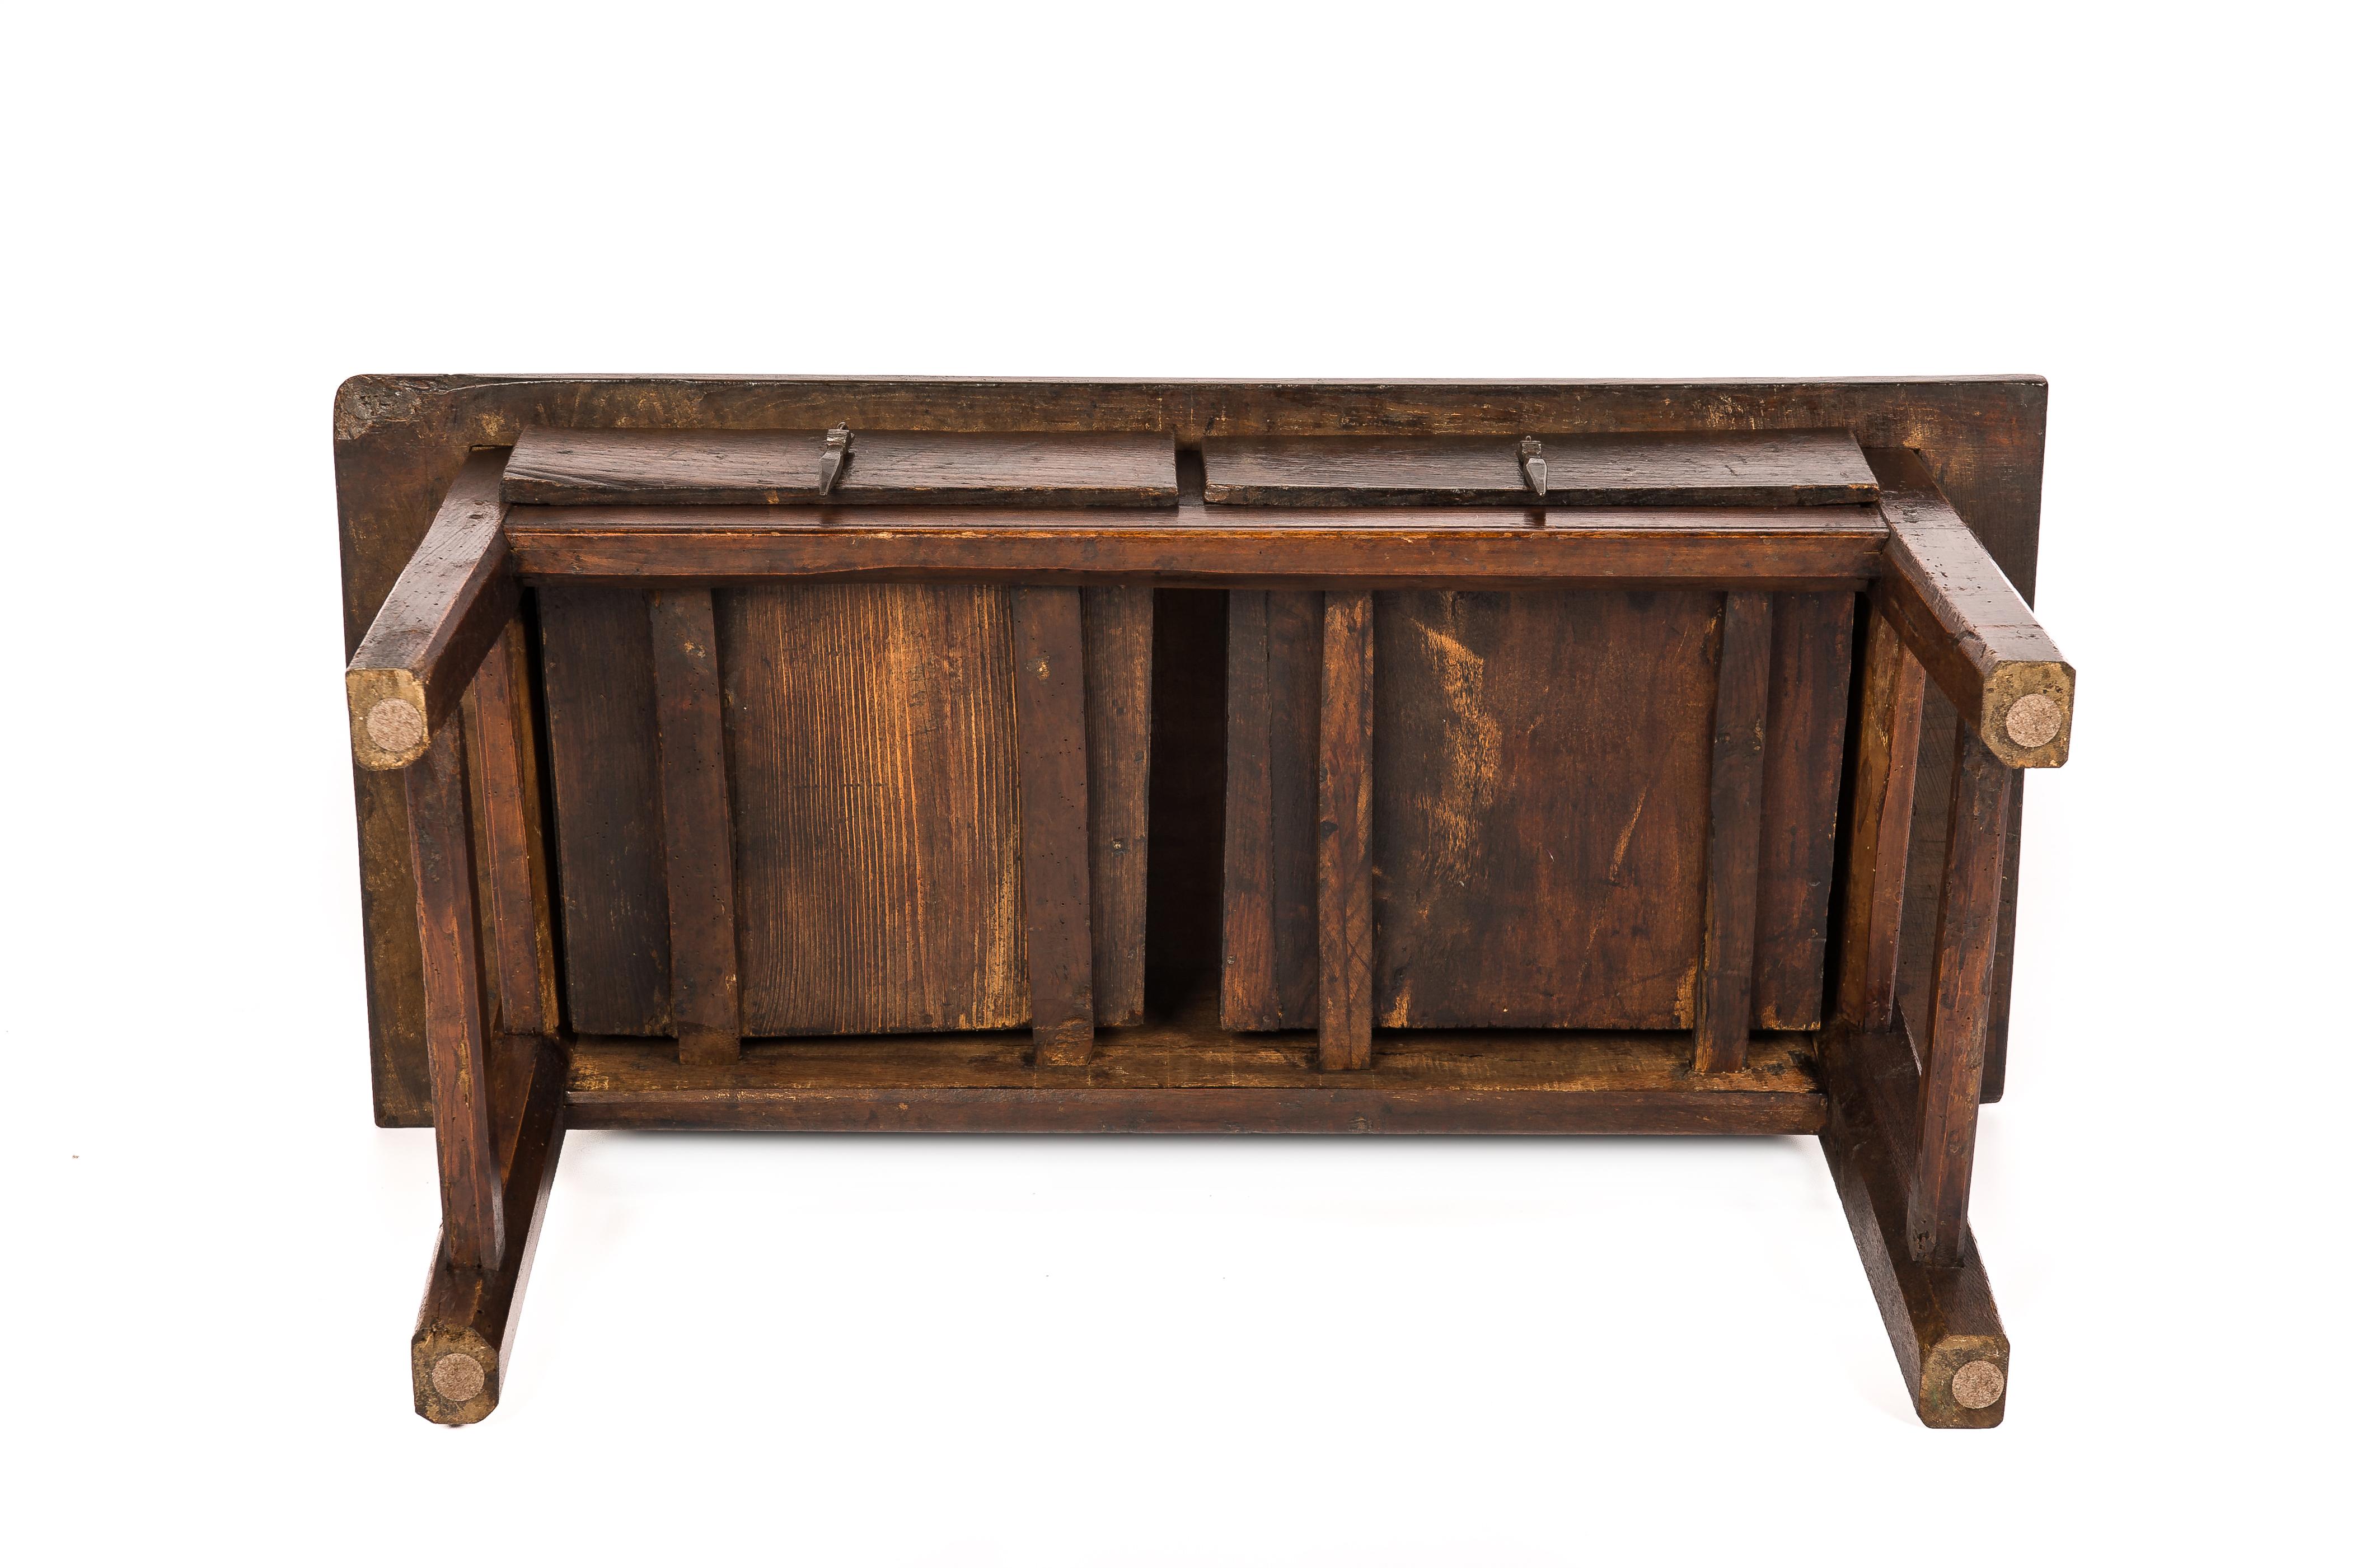 Antique Rural Early 19th Century Warm Brown Spanish Chestnut Coffee Table For Sale 7